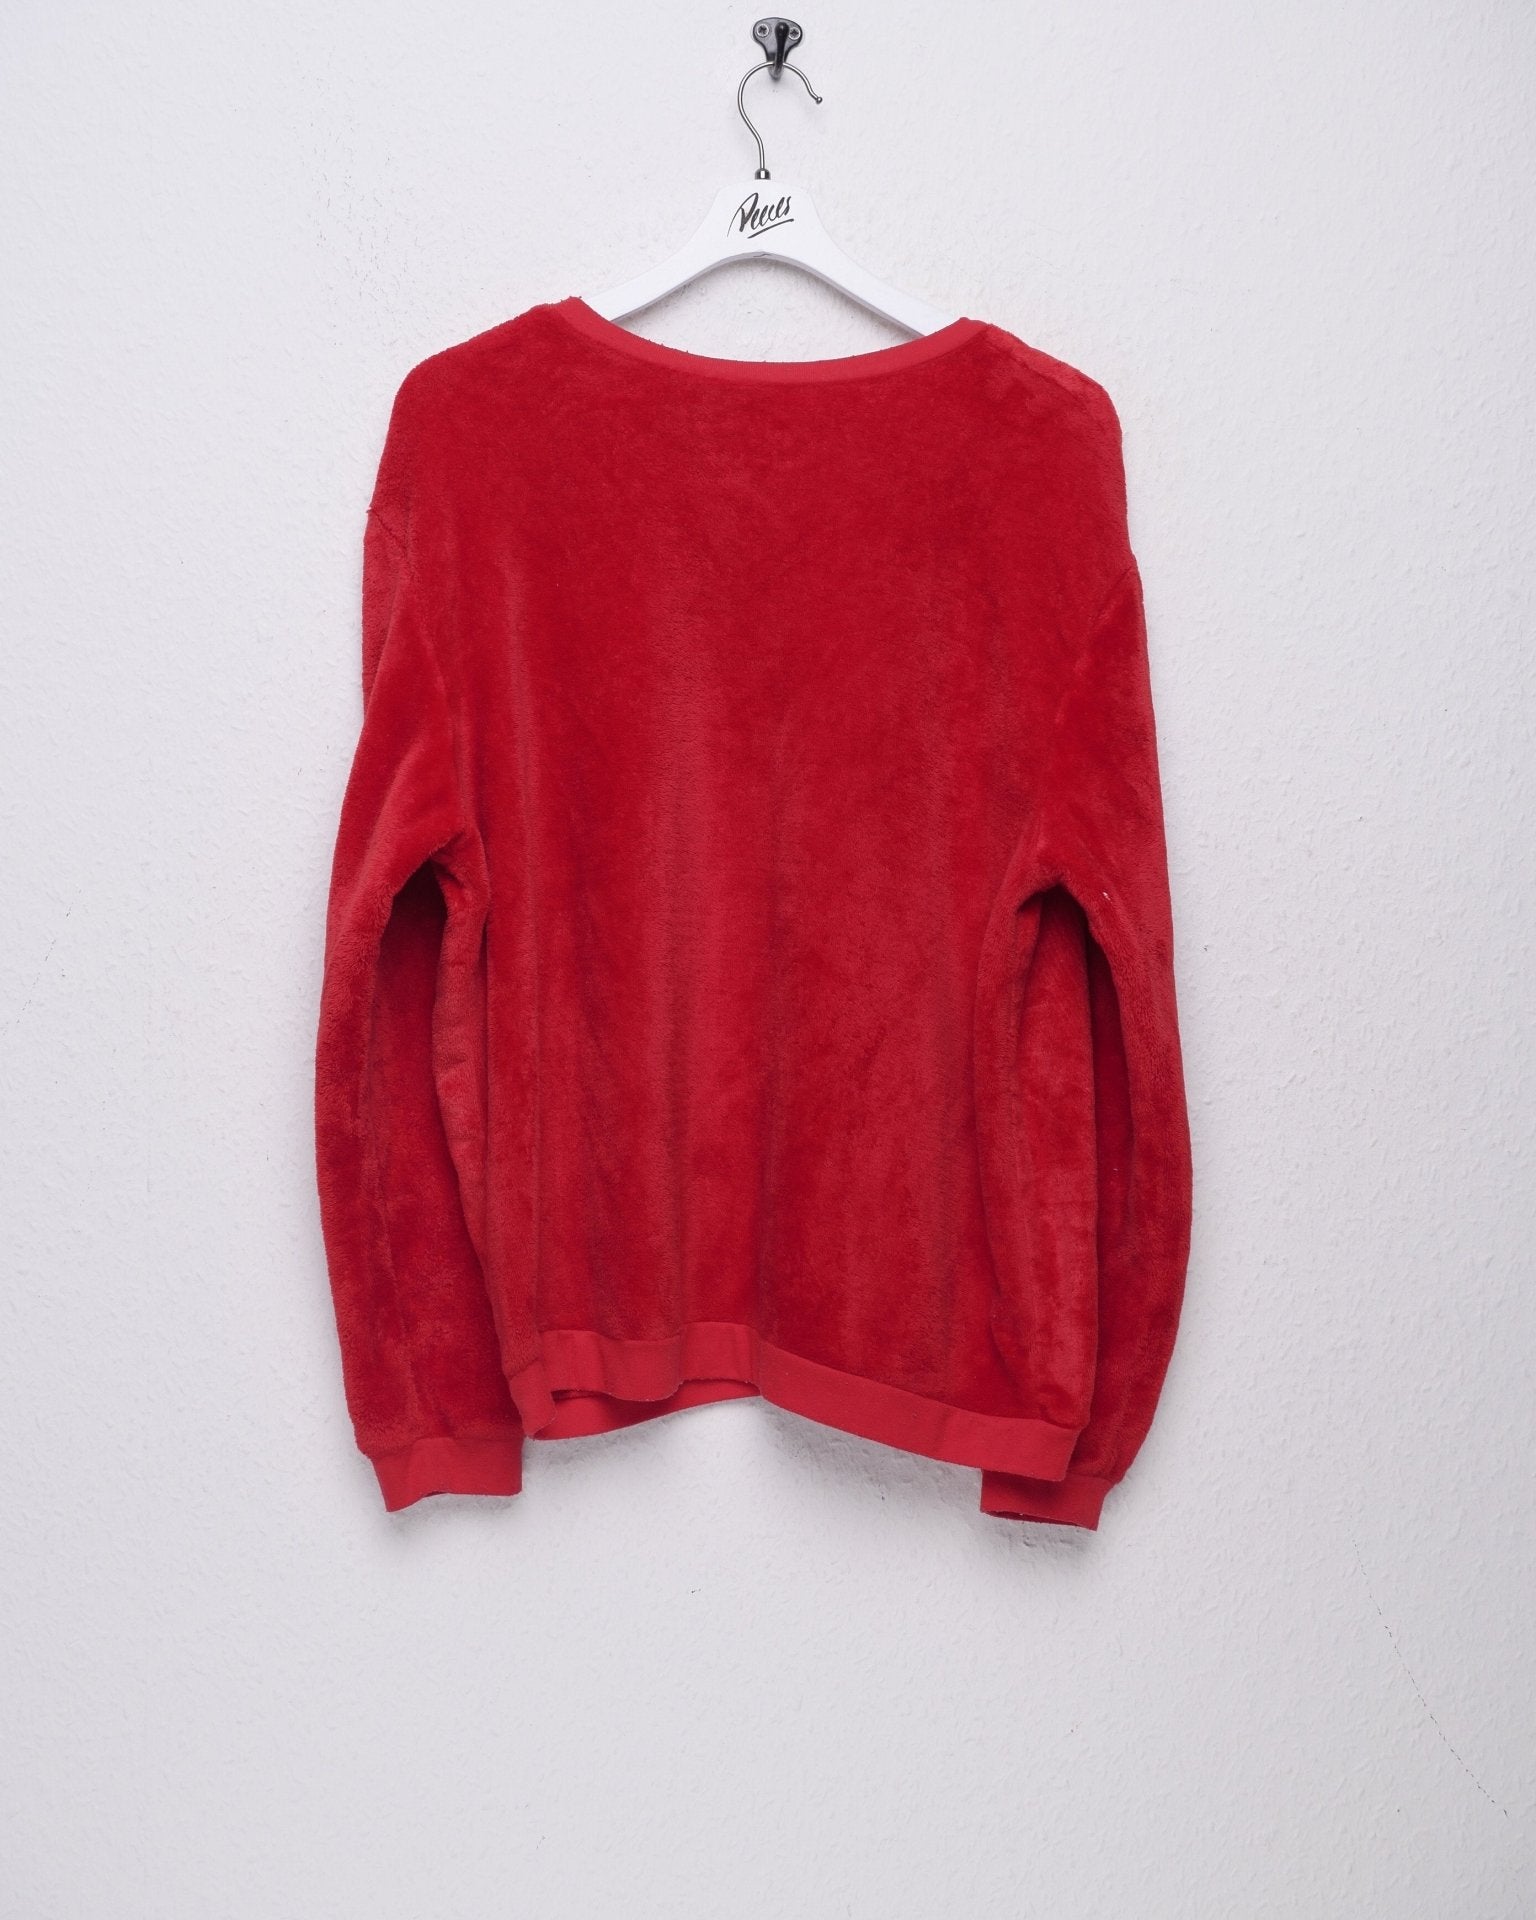 Disney printed Graphic red fuzzy Sweater - Peeces